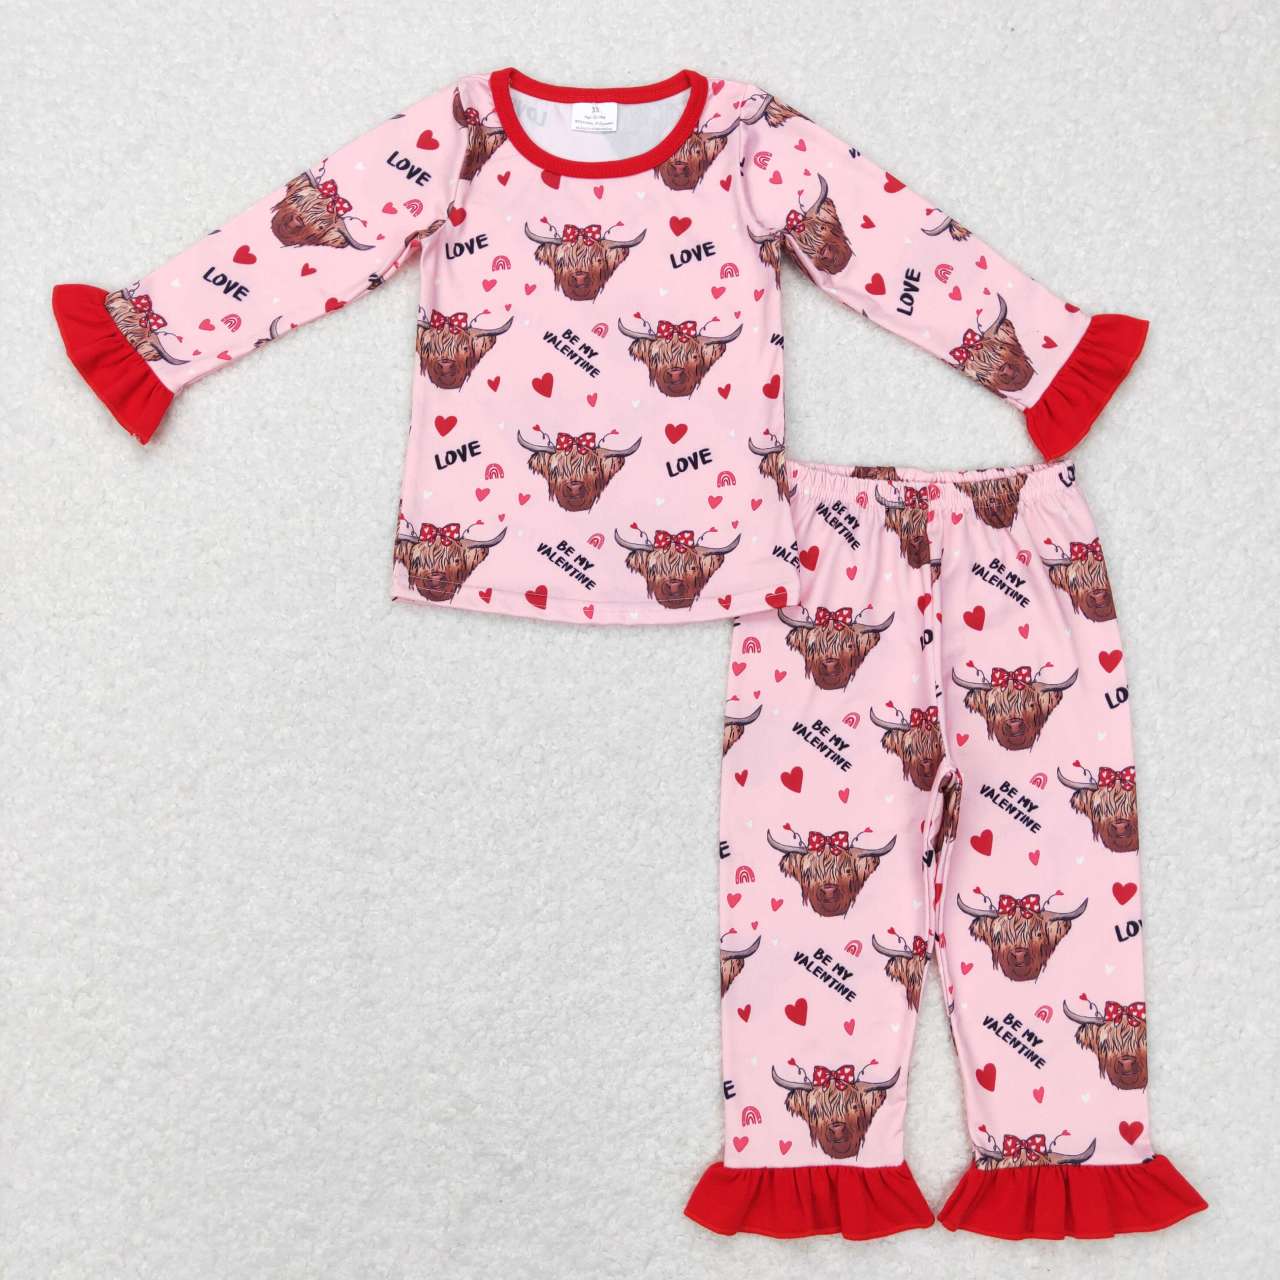 Highland Cow Heart Love Print Girls Valentine's Sisters Matching Clothes